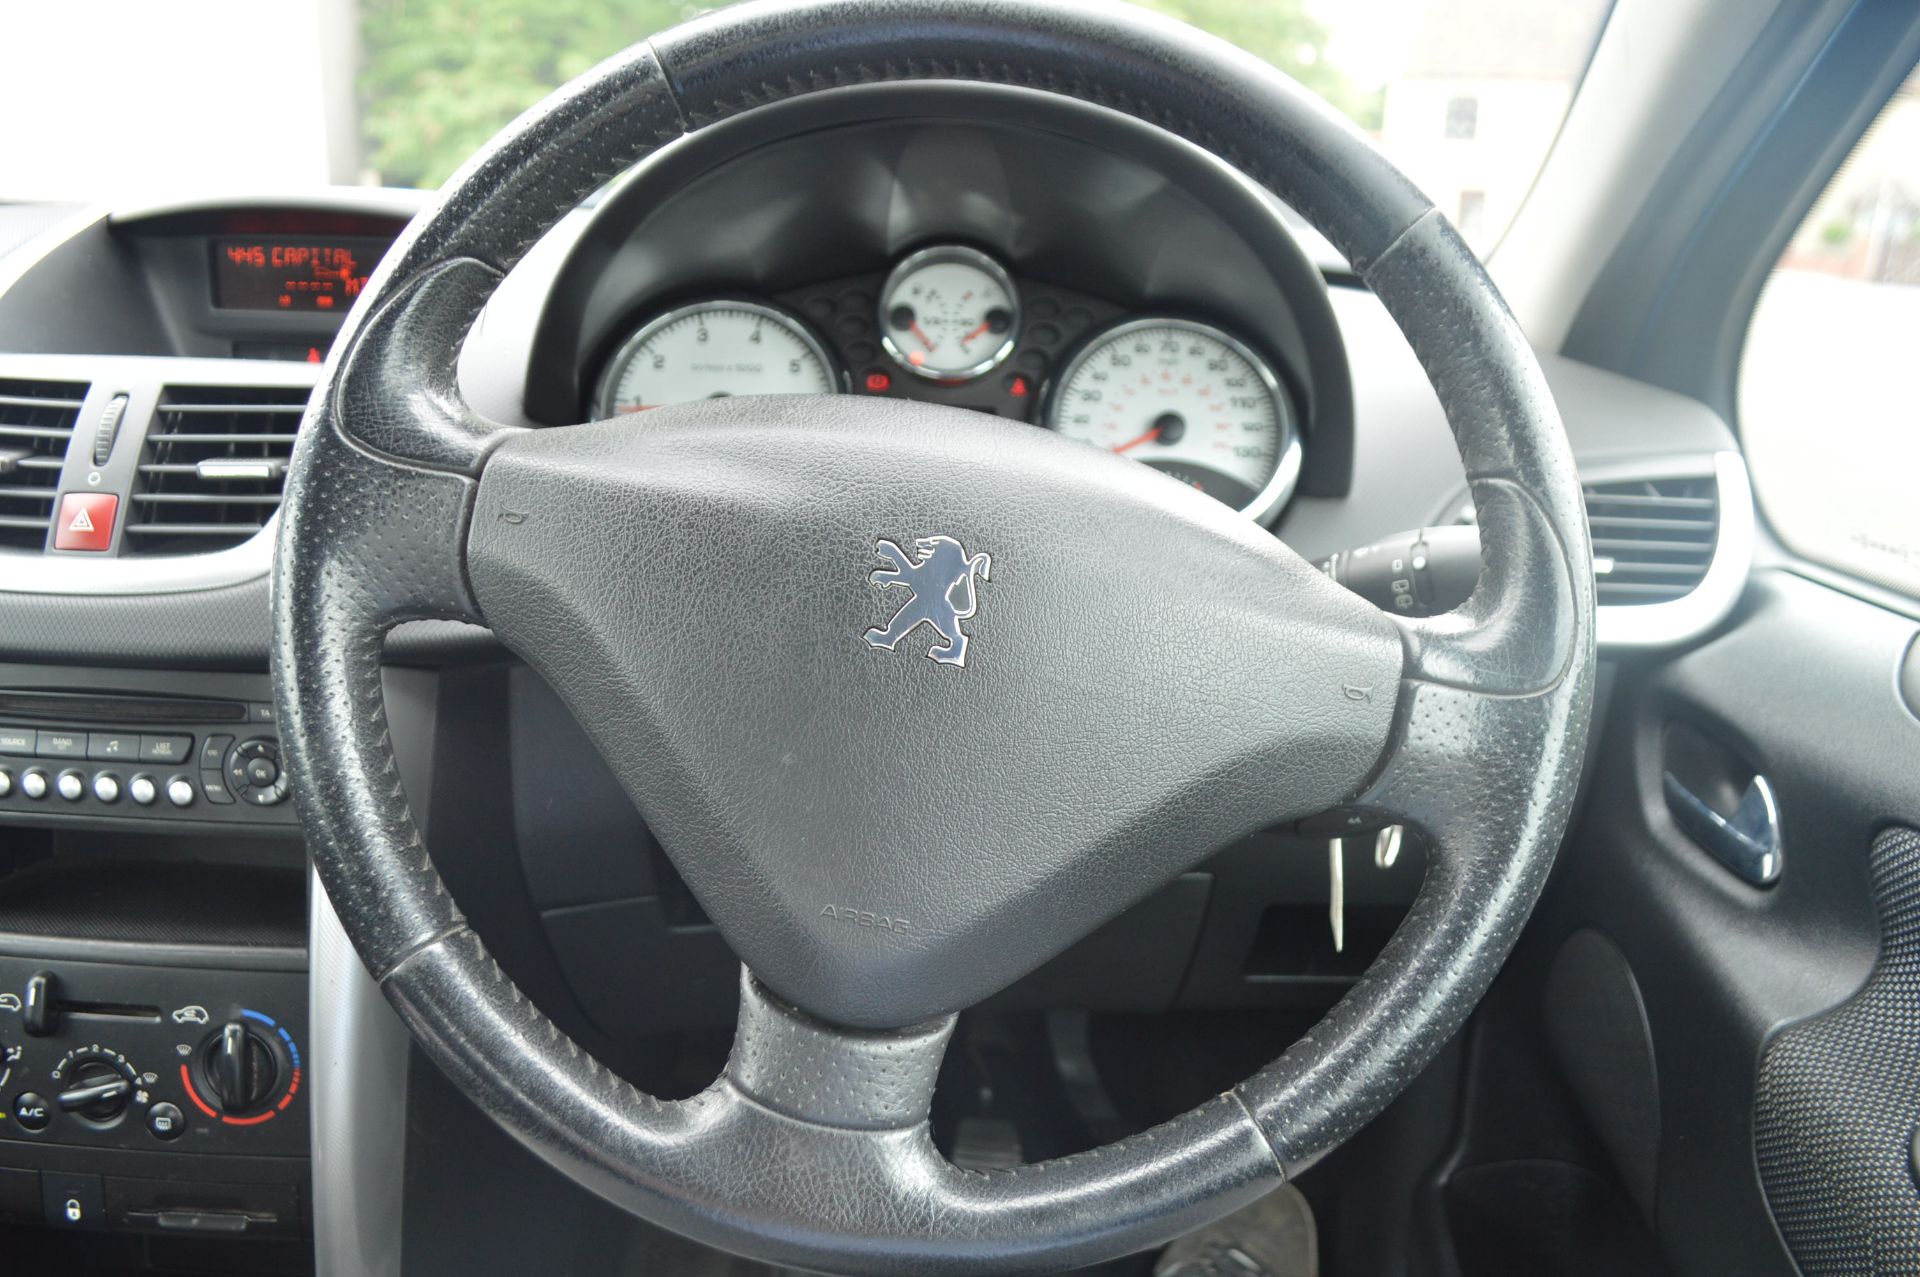 2008/08 REG PEUGEOT 207 M:PLAY, AIR CON, LONG MOT* WITH VALUER'S REPORT* - Image 12 of 16